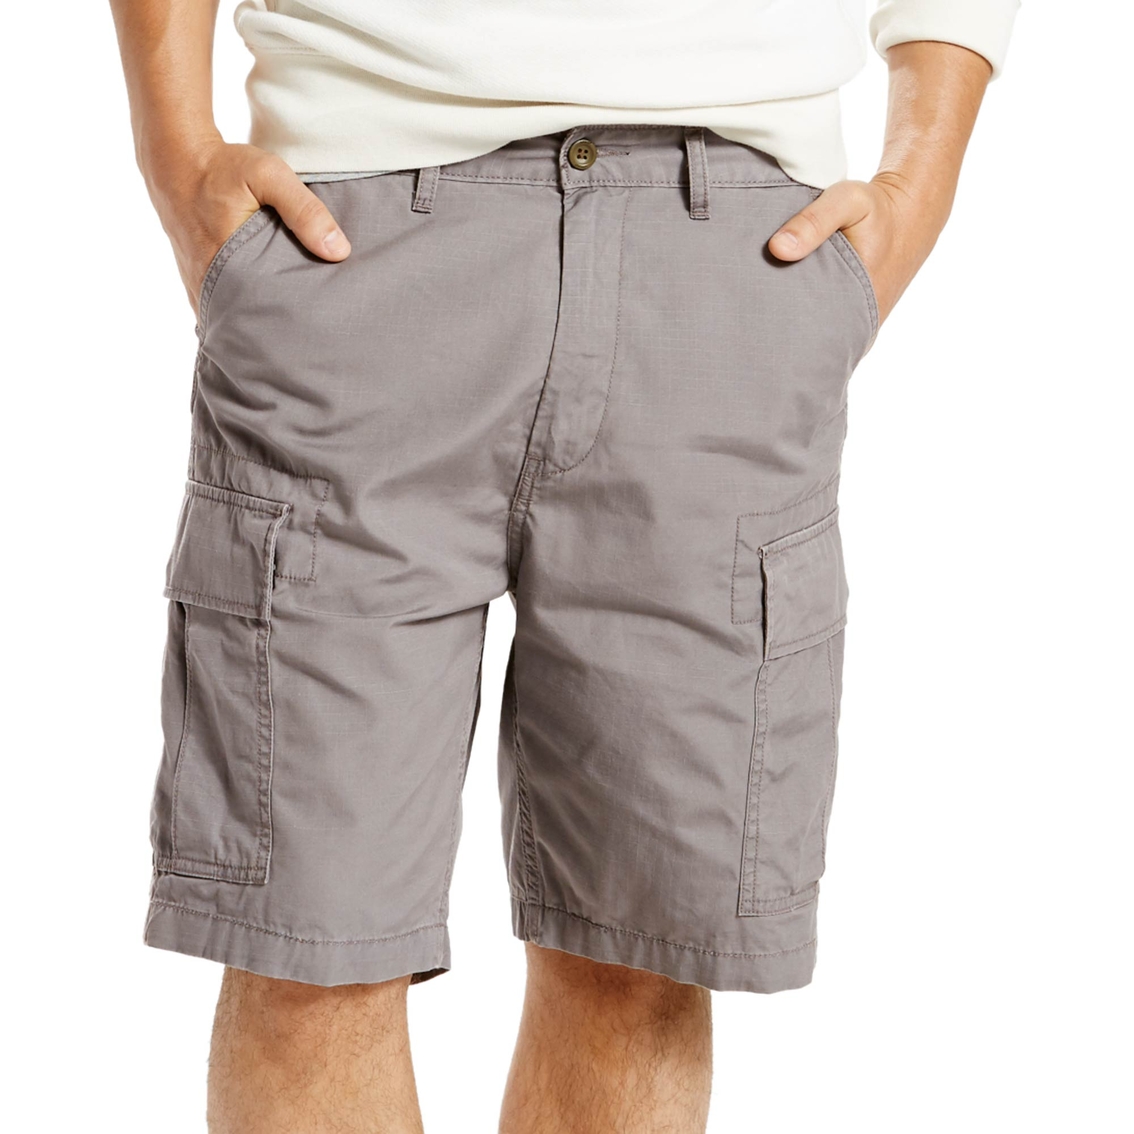 Levi's Carrier Cargo Shorts | Shorts | Clothing & Accessories | Shop ...